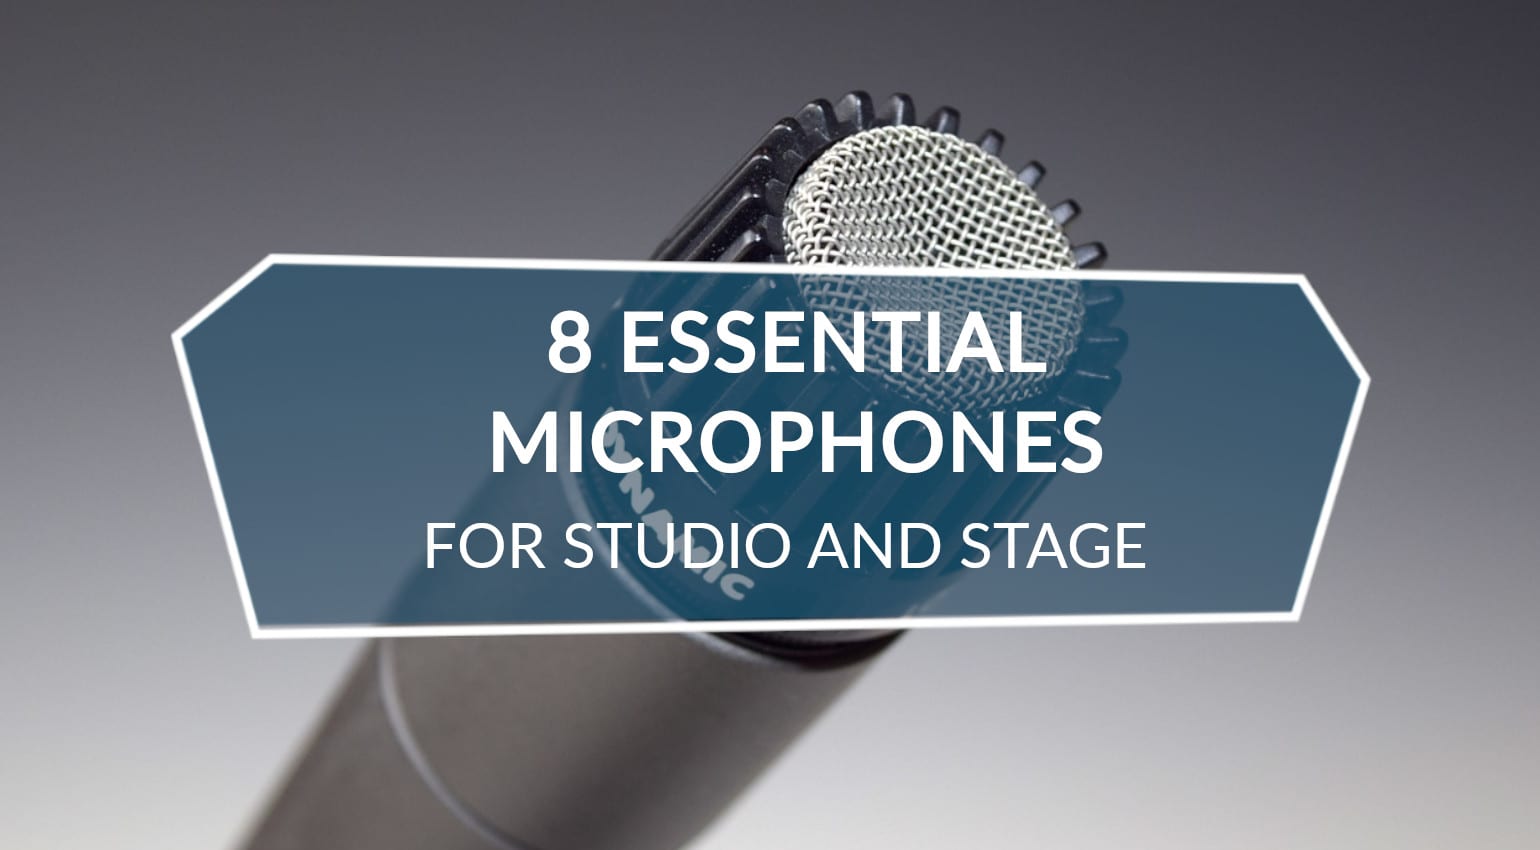 8 essential microphones for studio and stage